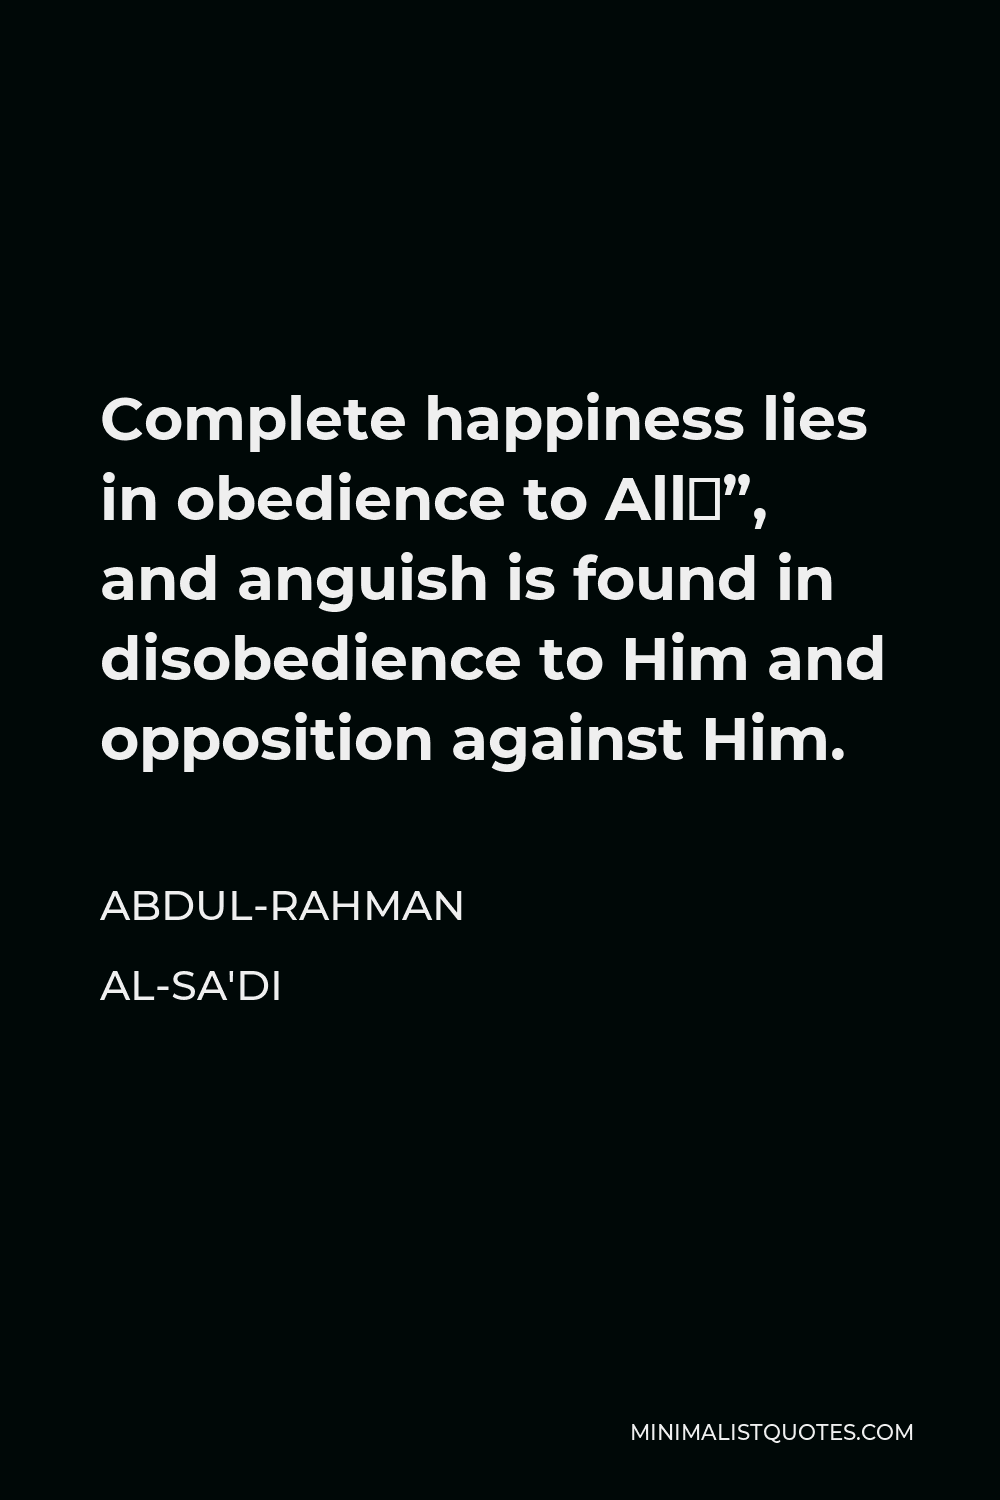 Abdul-Rahman al-Sa'di Quote - Complete happiness lies in obedience to Allāh, and anguish is found in disobedience to Him and opposition against Him.